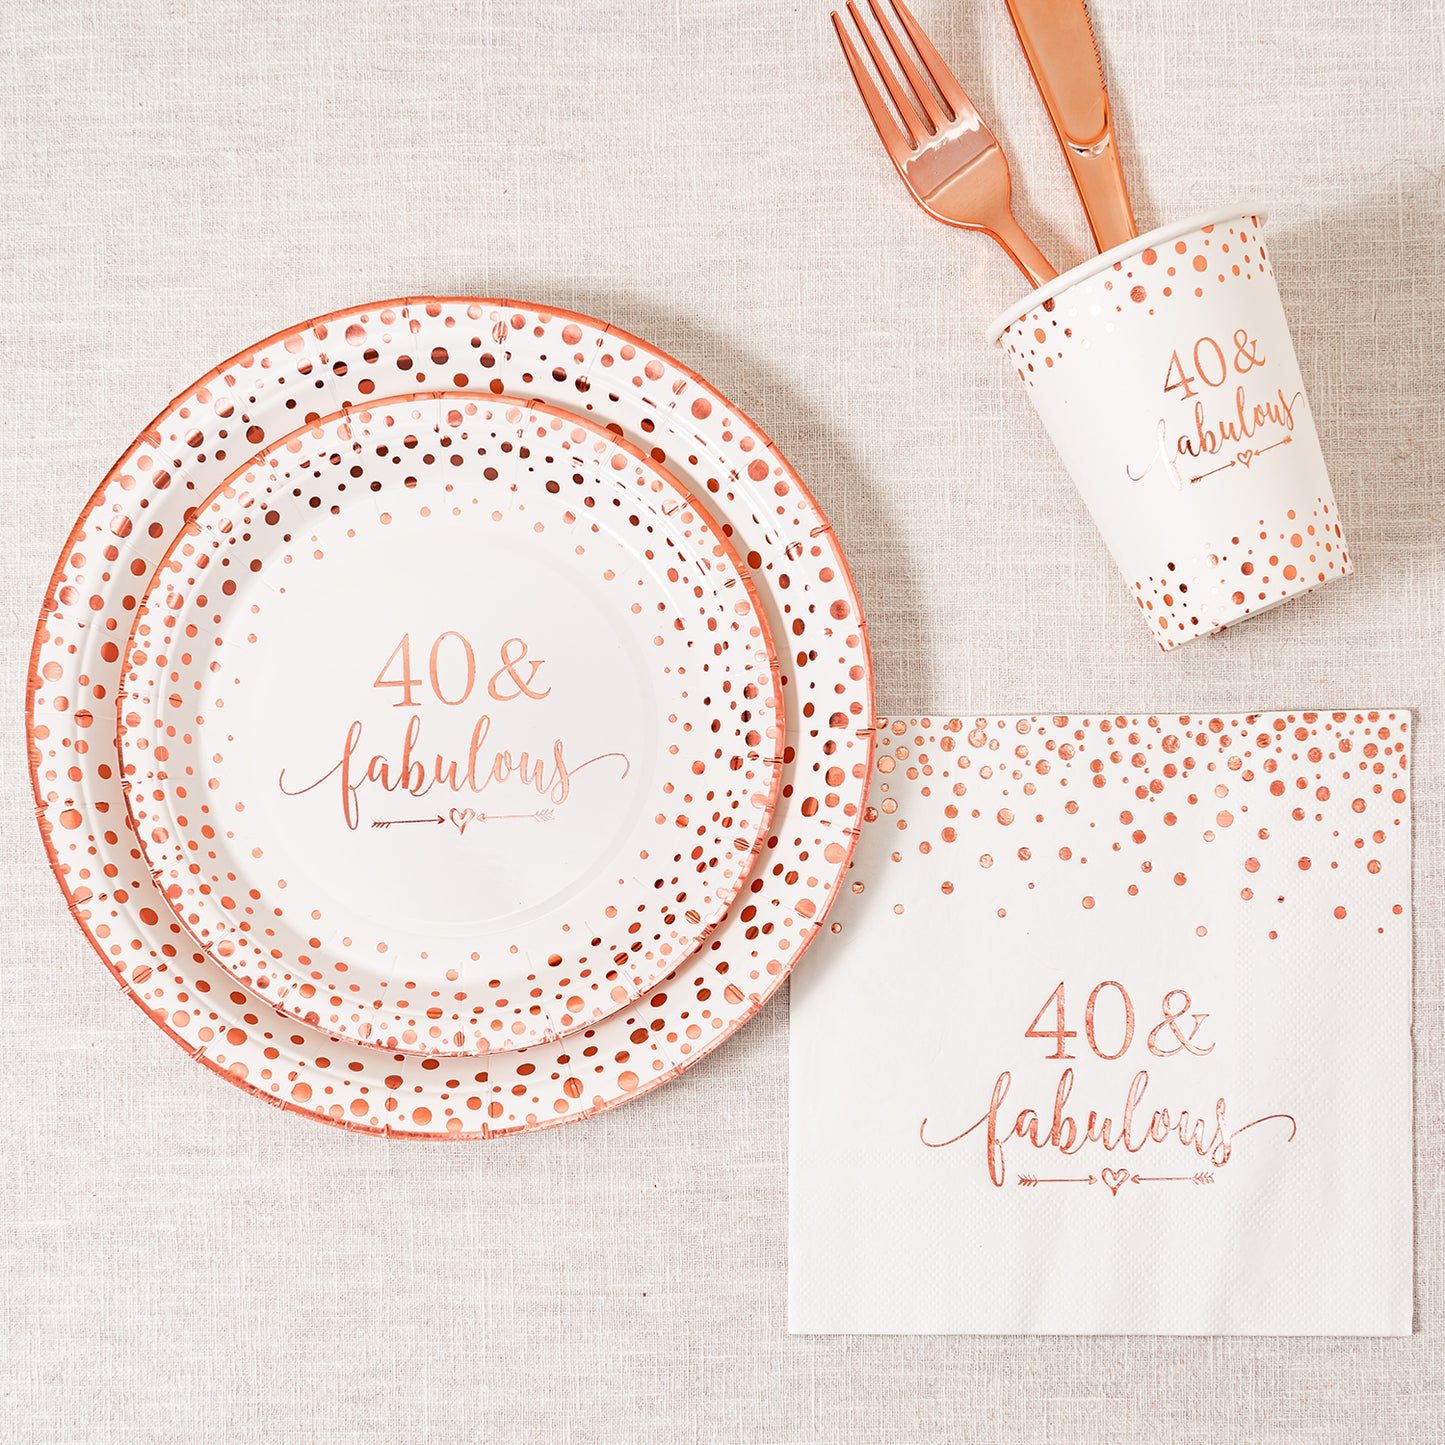 Crisky Rose Gold 40 Fabulous Napkins Plates Cups Set for Women 40th Birthday Party Decorations Supplies, Disposable Tableware Set of 24 (9" Plates, 7" Plates, Luncheon Napkins, 9oz Cups)